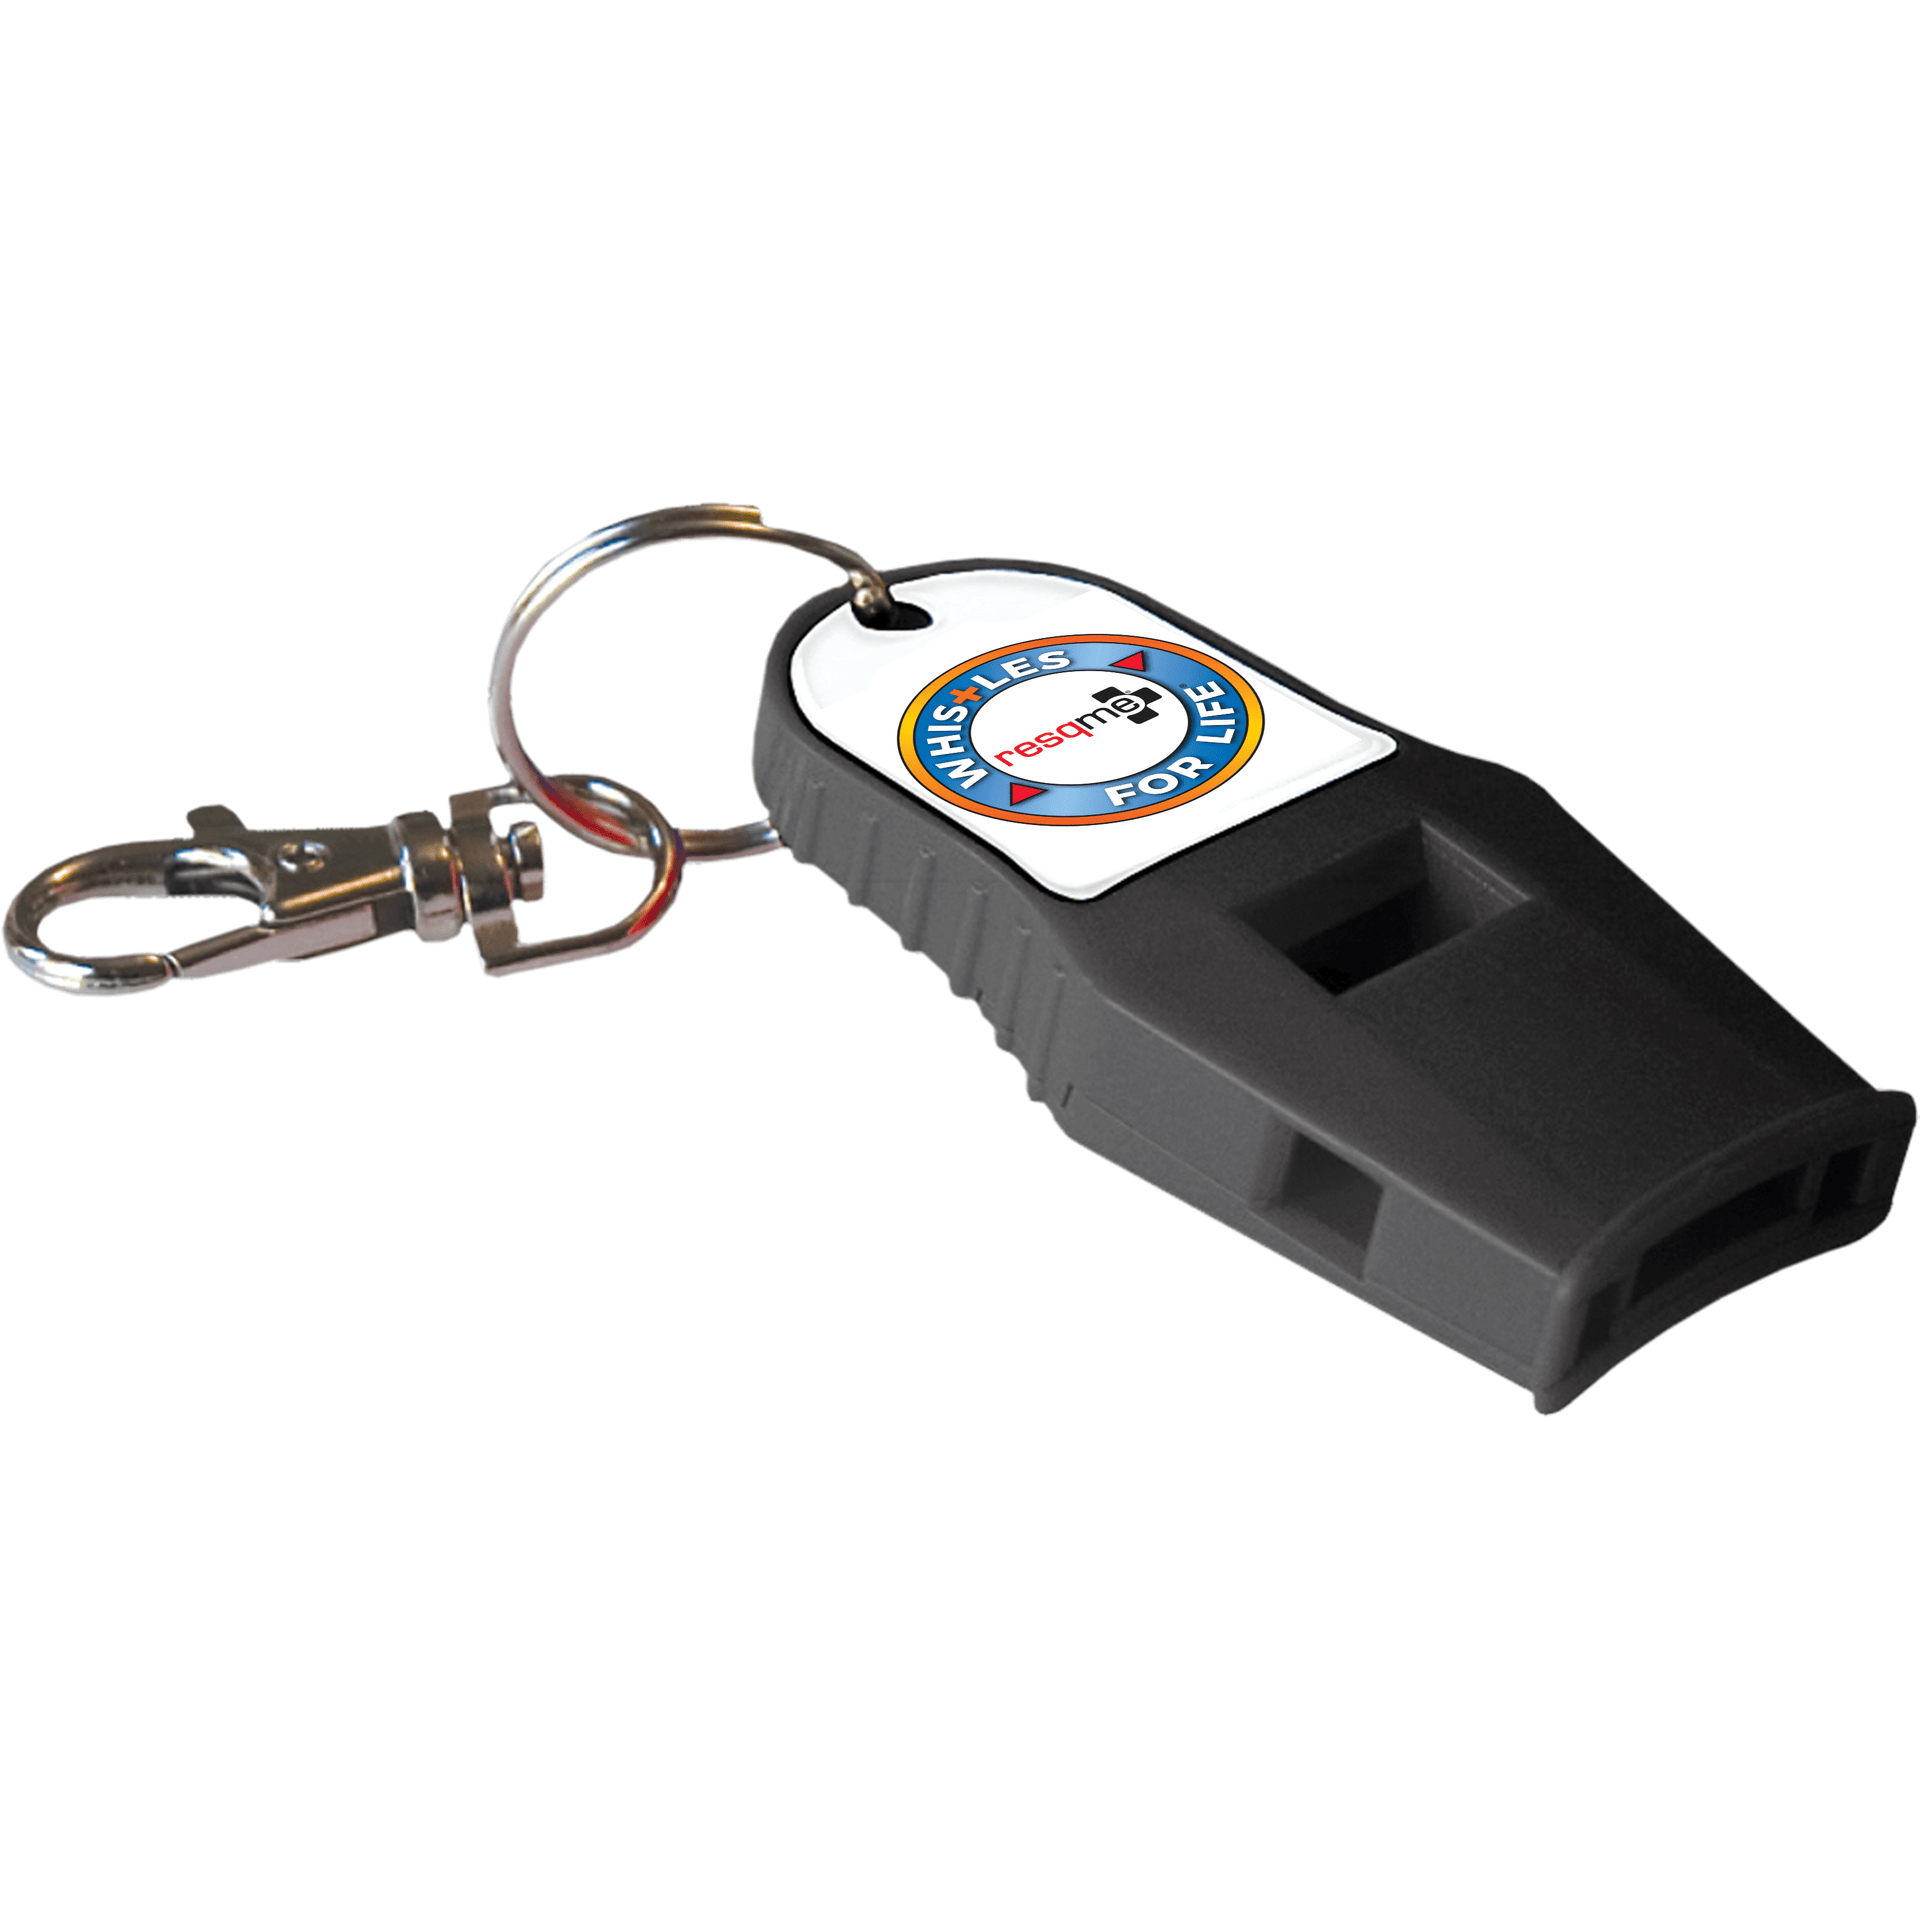 Paramedic Shop Resqme Inc Tools Black Whistle for Life - Safety Whistle